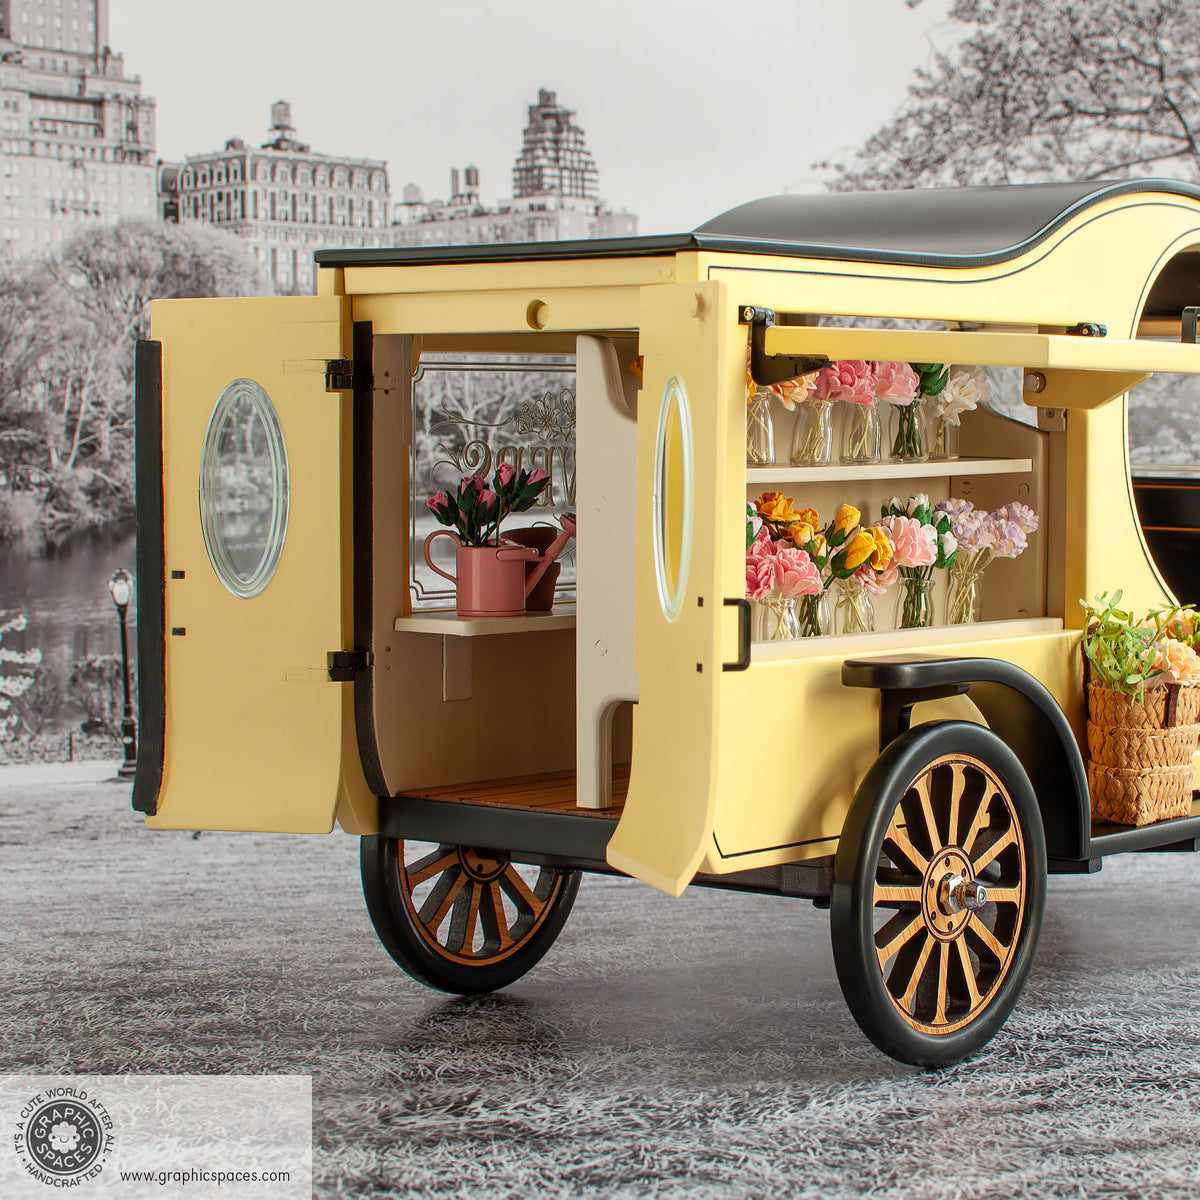 1:12 Scale Room Box Yellow Flower Shop Truck Model T C Cab. Rear view open doors. Partial Counter and Shelves displayed.